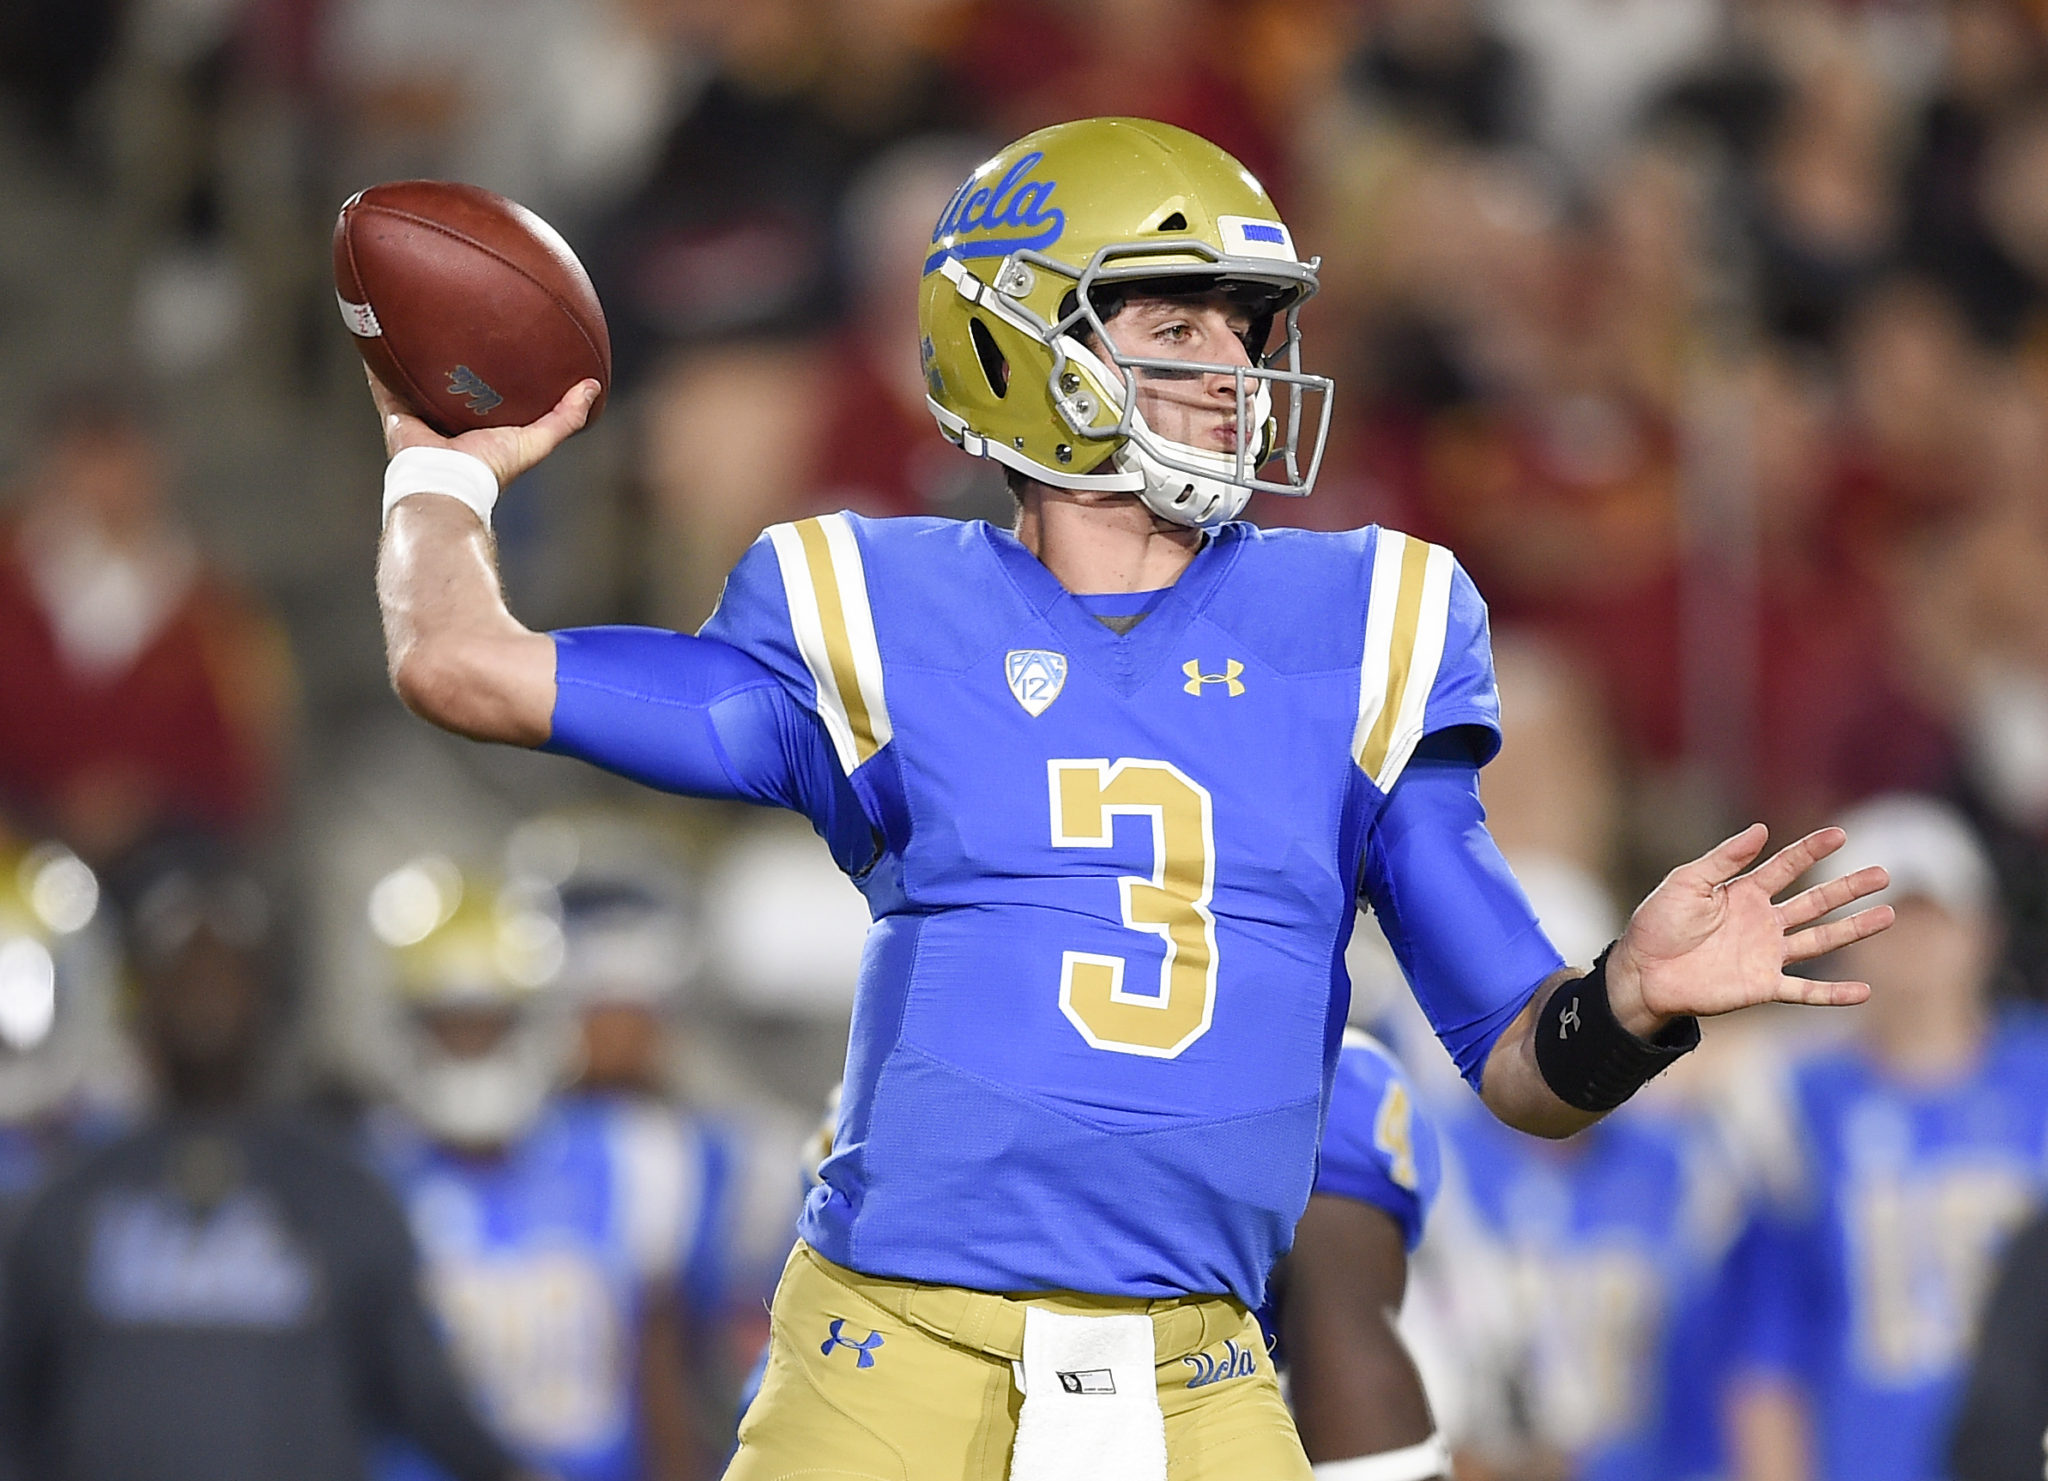 2018 Nfl Draft Cleveland Browns Need To Pull The Trigger On Ucla Qb Josh Rosen